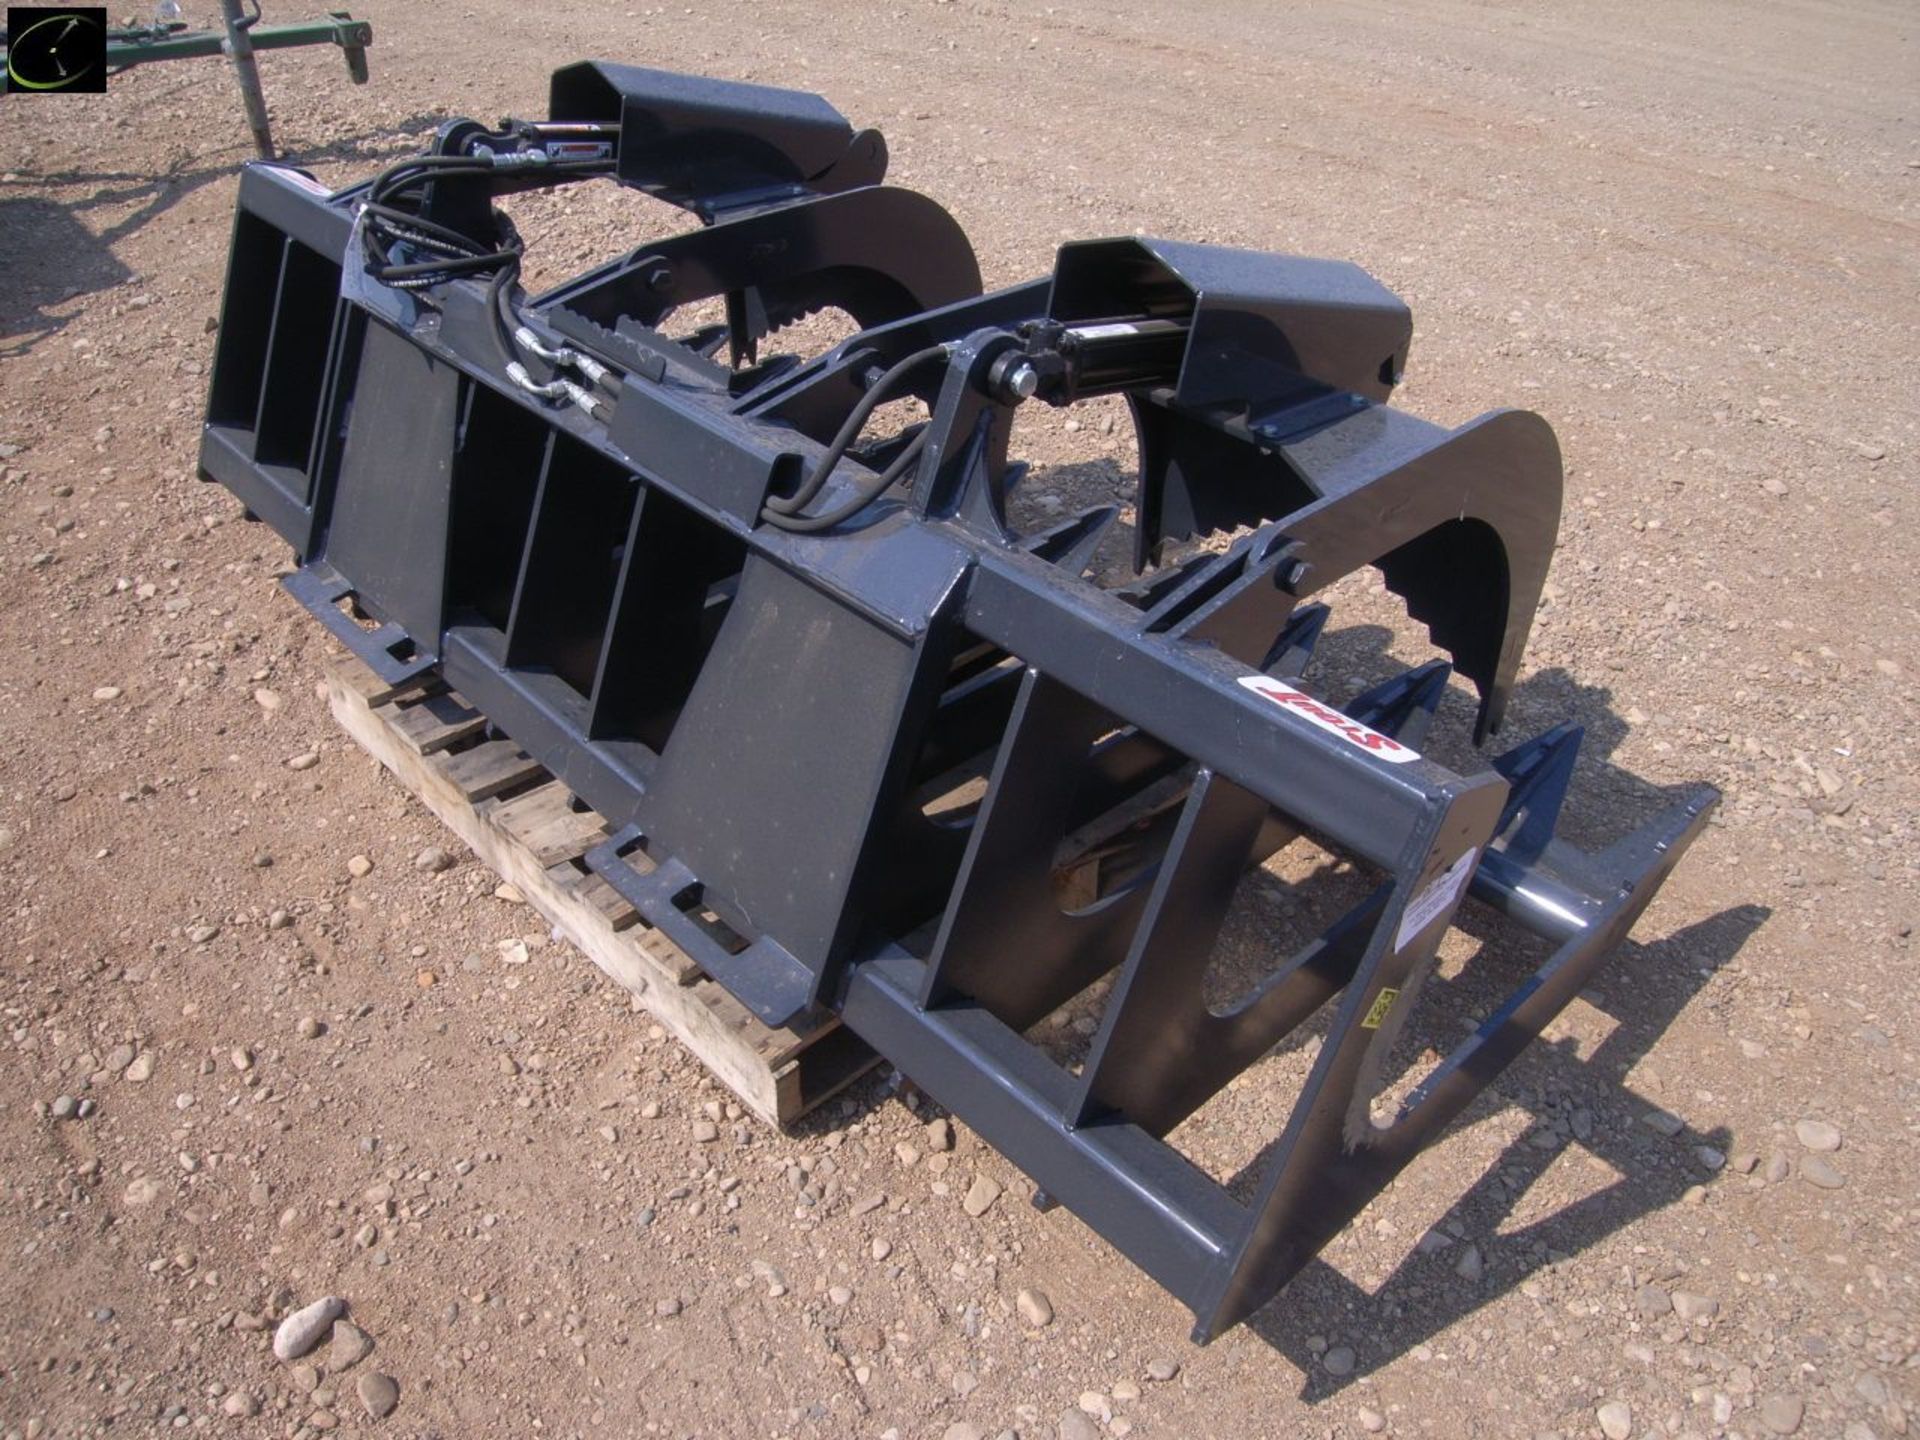 Stout XHD 84-6 nrush grapple w skid steer attachments - Image 2 of 4